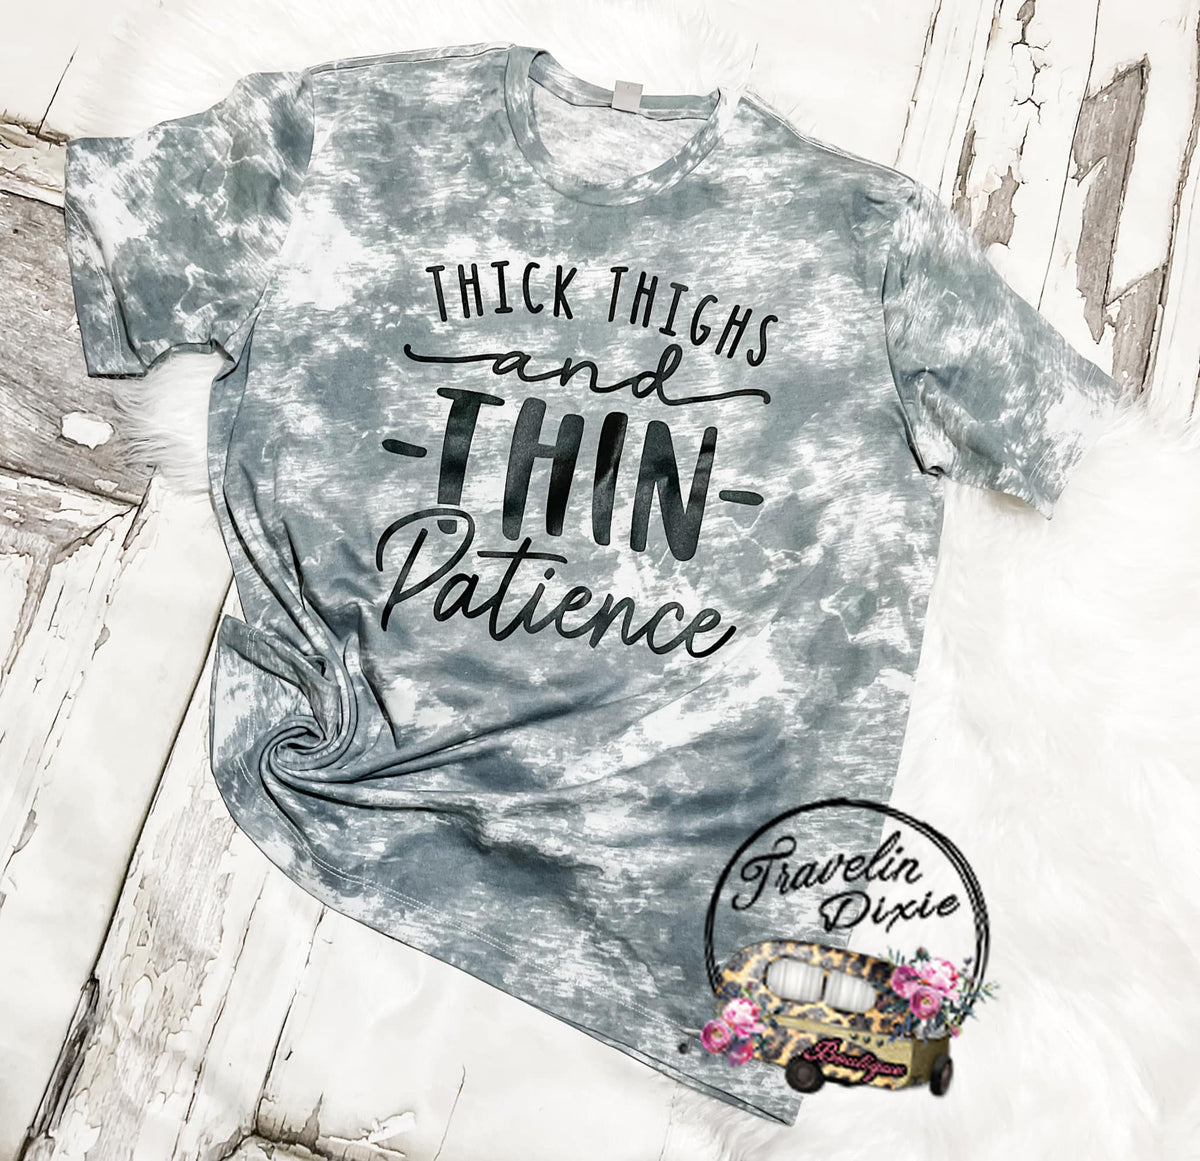 Thick Thighs Thin Patience Tee